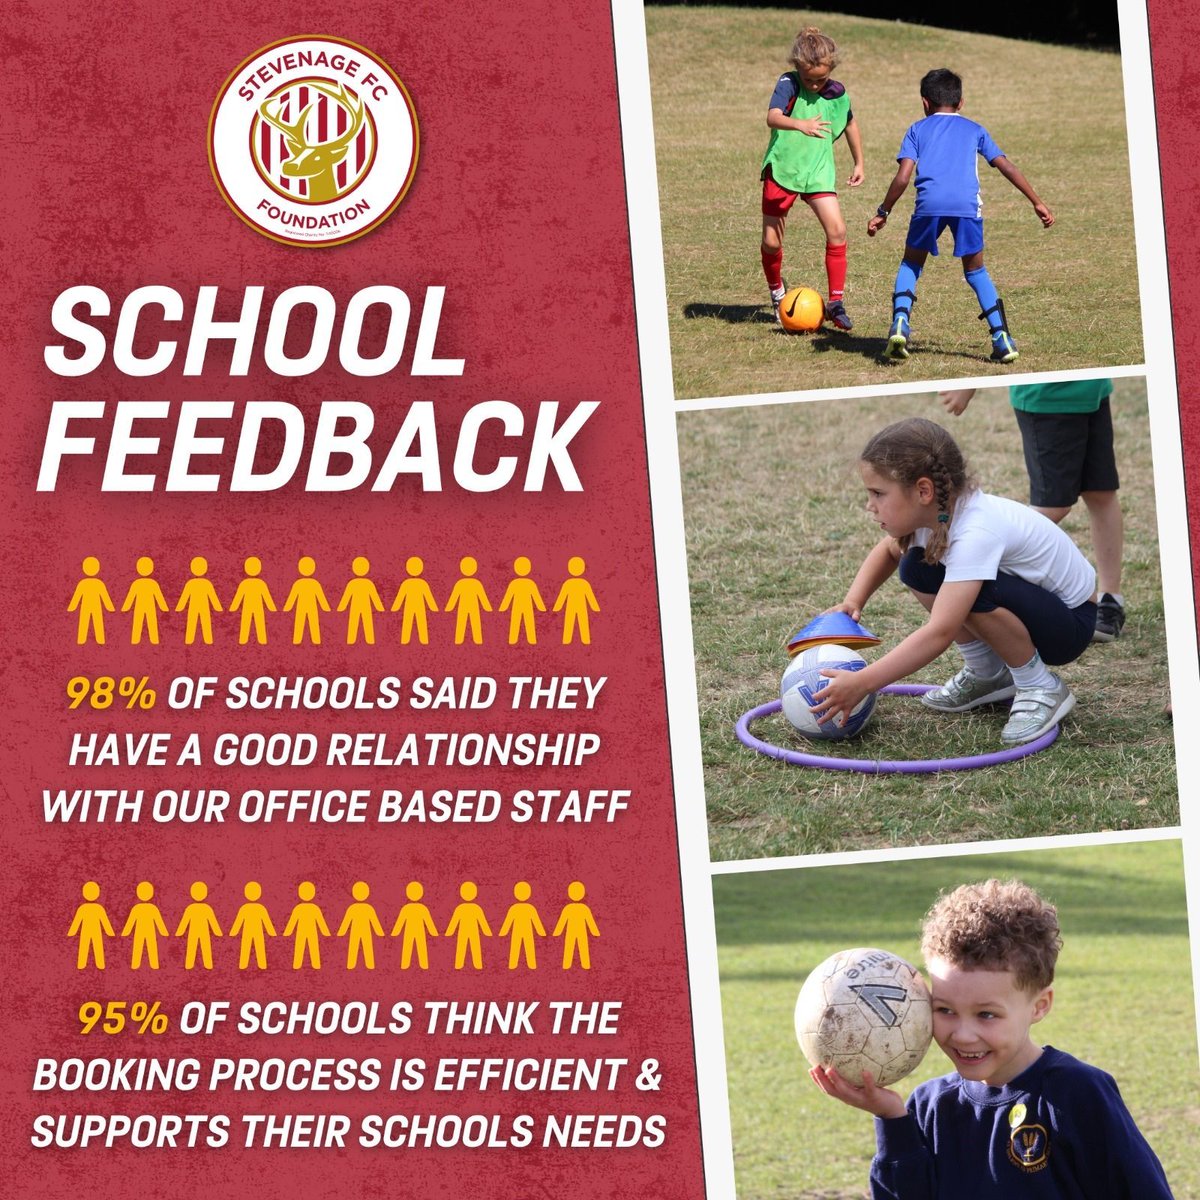 We ❤️ school feedback 🫶 Our school sessions return from Monday 15th April! Book now to secure your space for the summer term!🥳 🔗- buff.ly/3HCjAPu #extracurricular #school #stevenagefc #stevenagefcf #stevenagefcfoundation